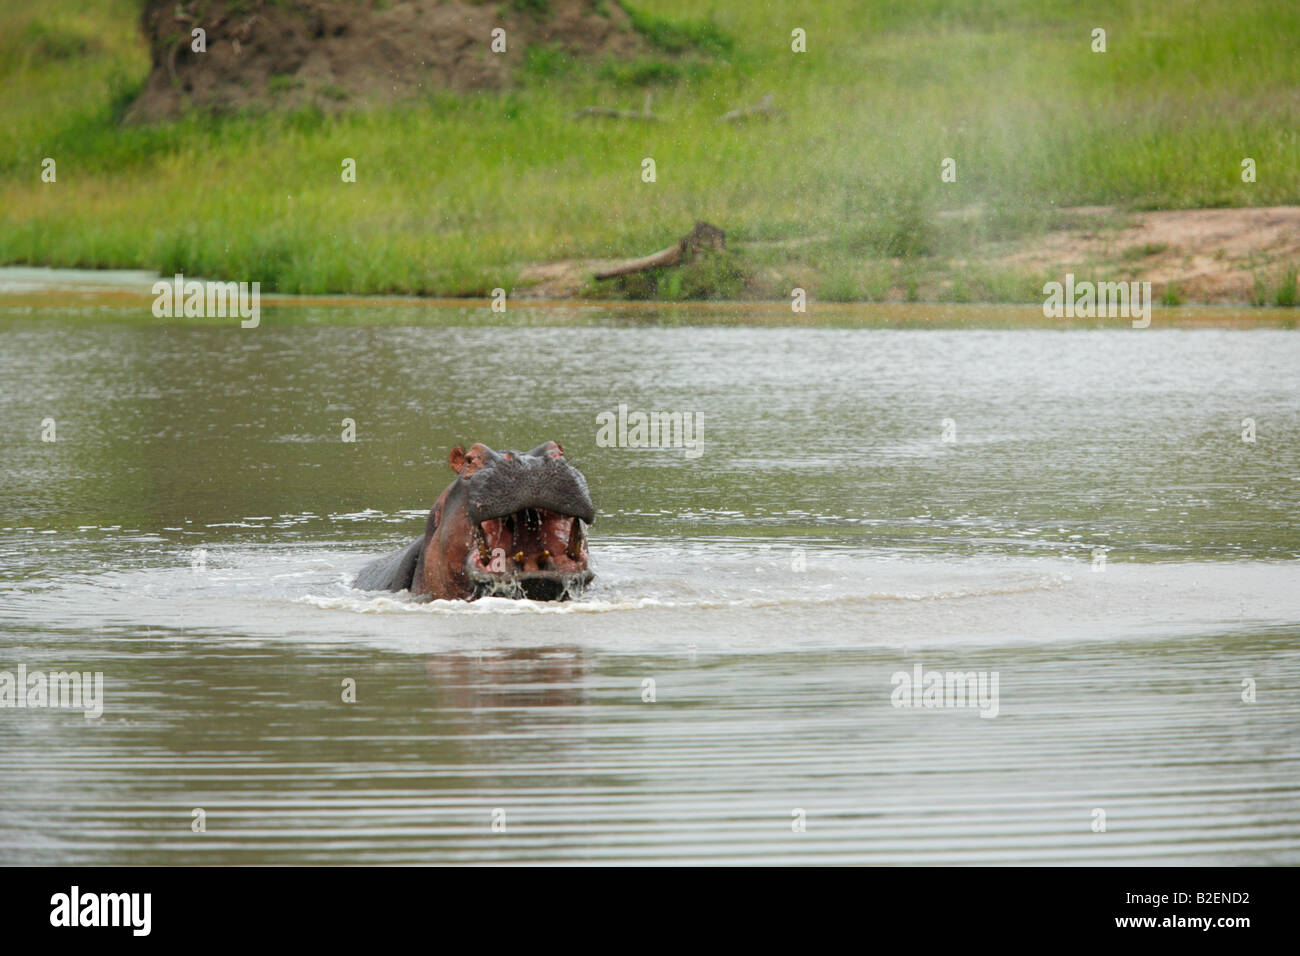 Scenic view of a hippopotamus rising aggressively out of the water Stock Photo